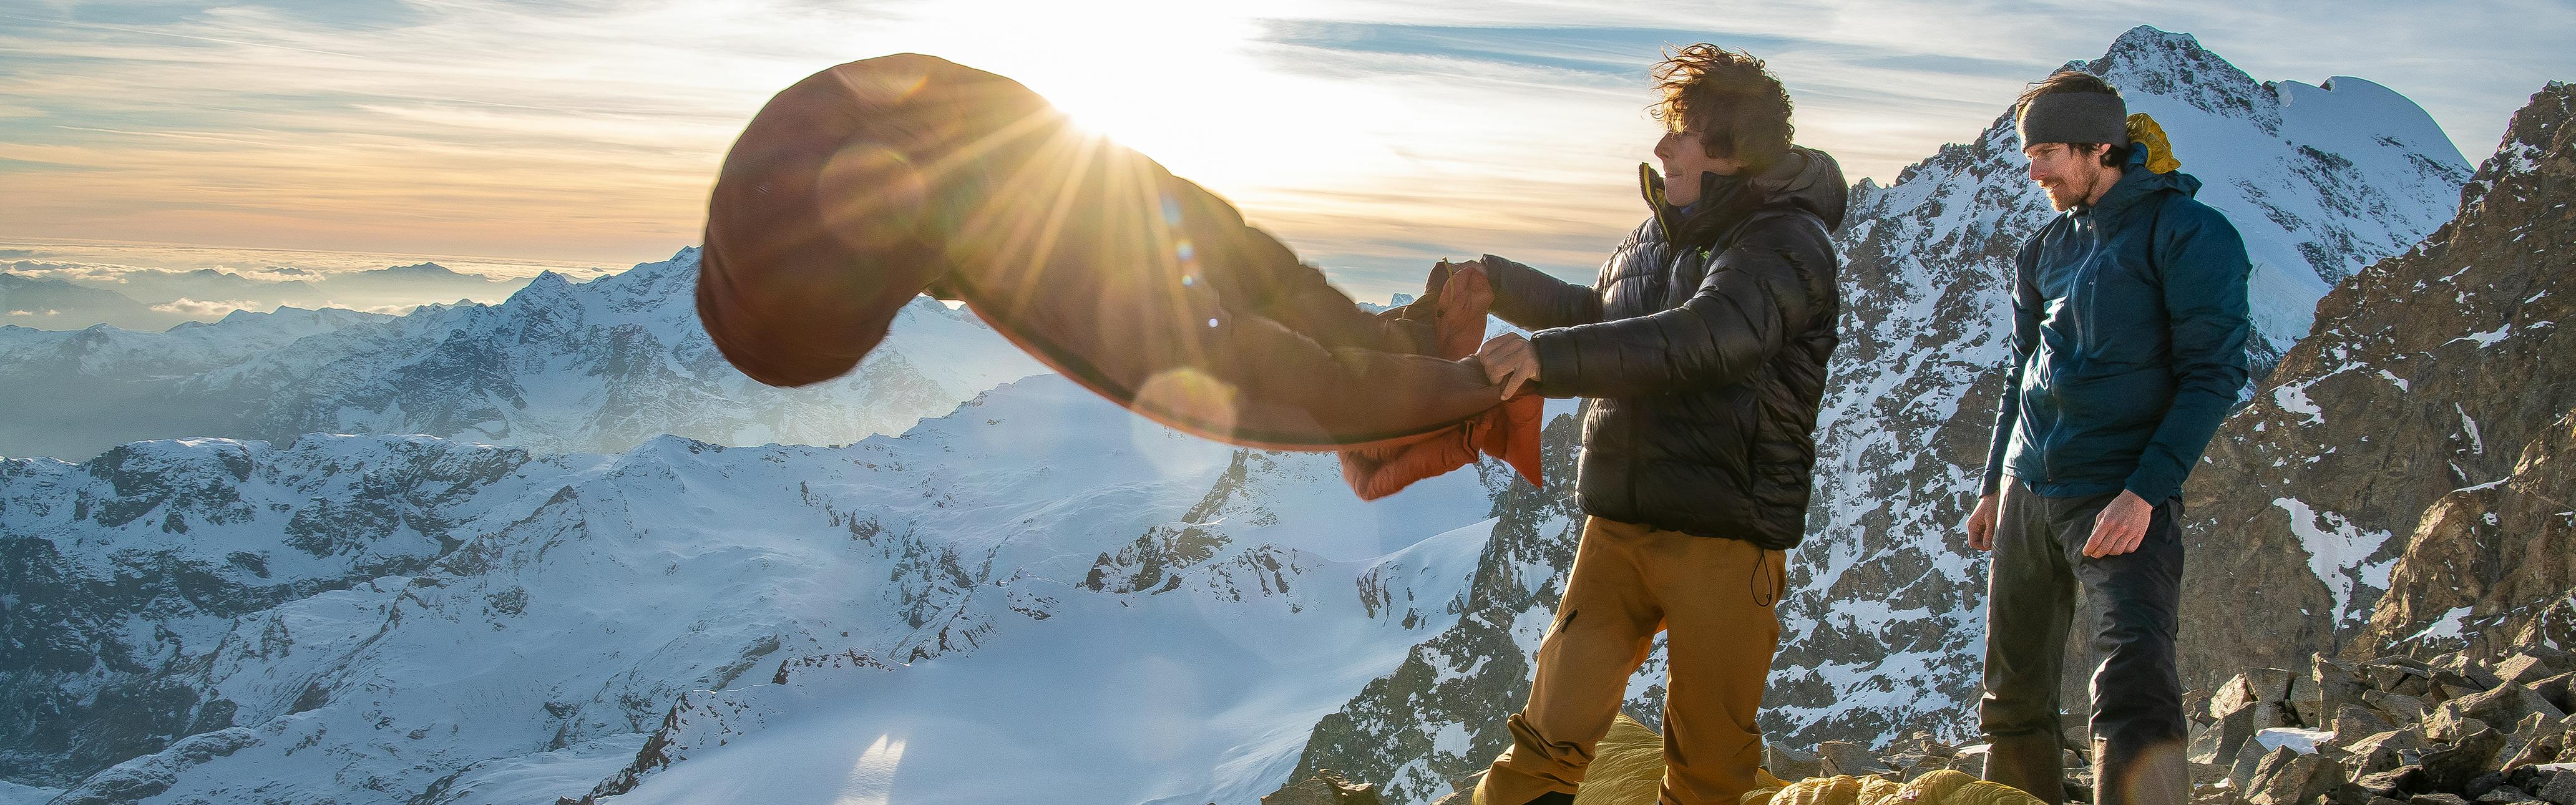 A hiker fluffy out his sleeping bag on a mountain summit next to his hiking partner with the sun setting over snowy mountain scenery in the background